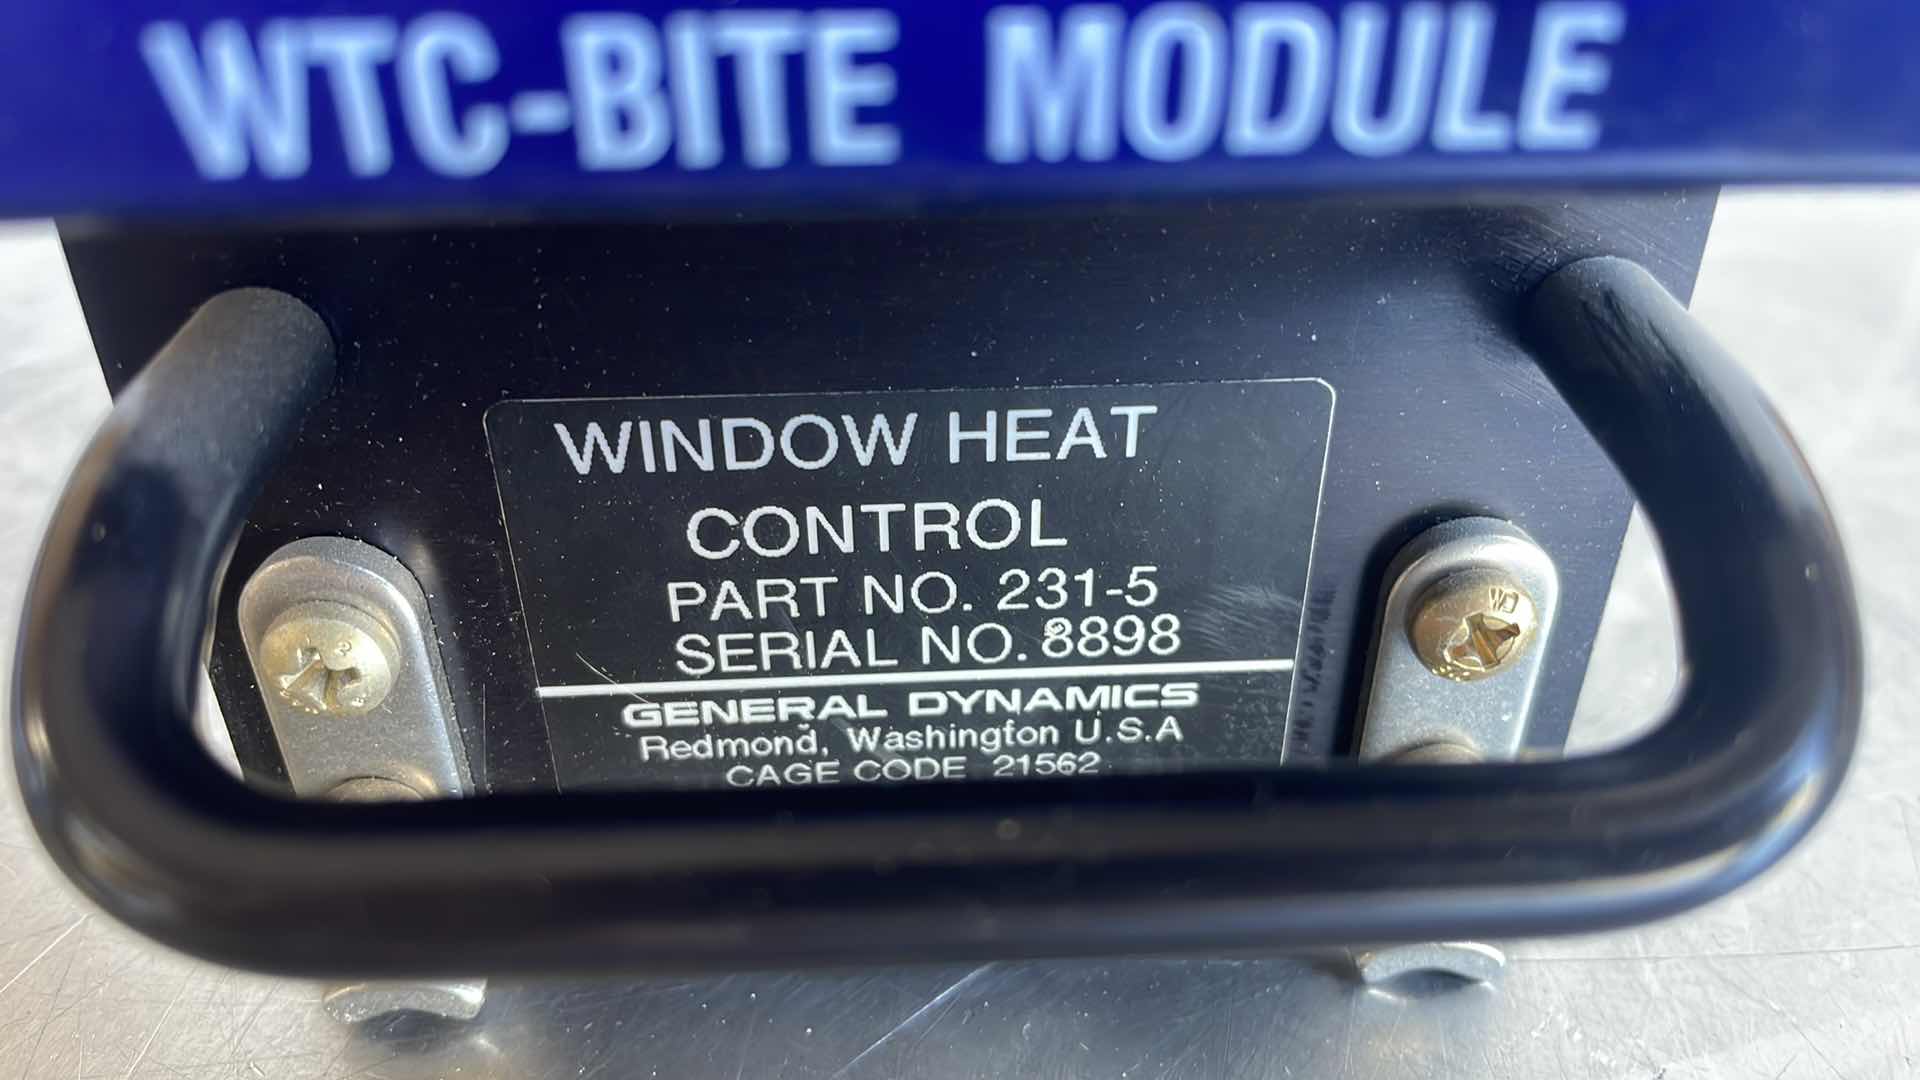 Photo 5 of 231-5 WINDOW HEAT CONTROL FOR BOEING 737 - 100 200 300 400 500
600 800 AIRCRAFT